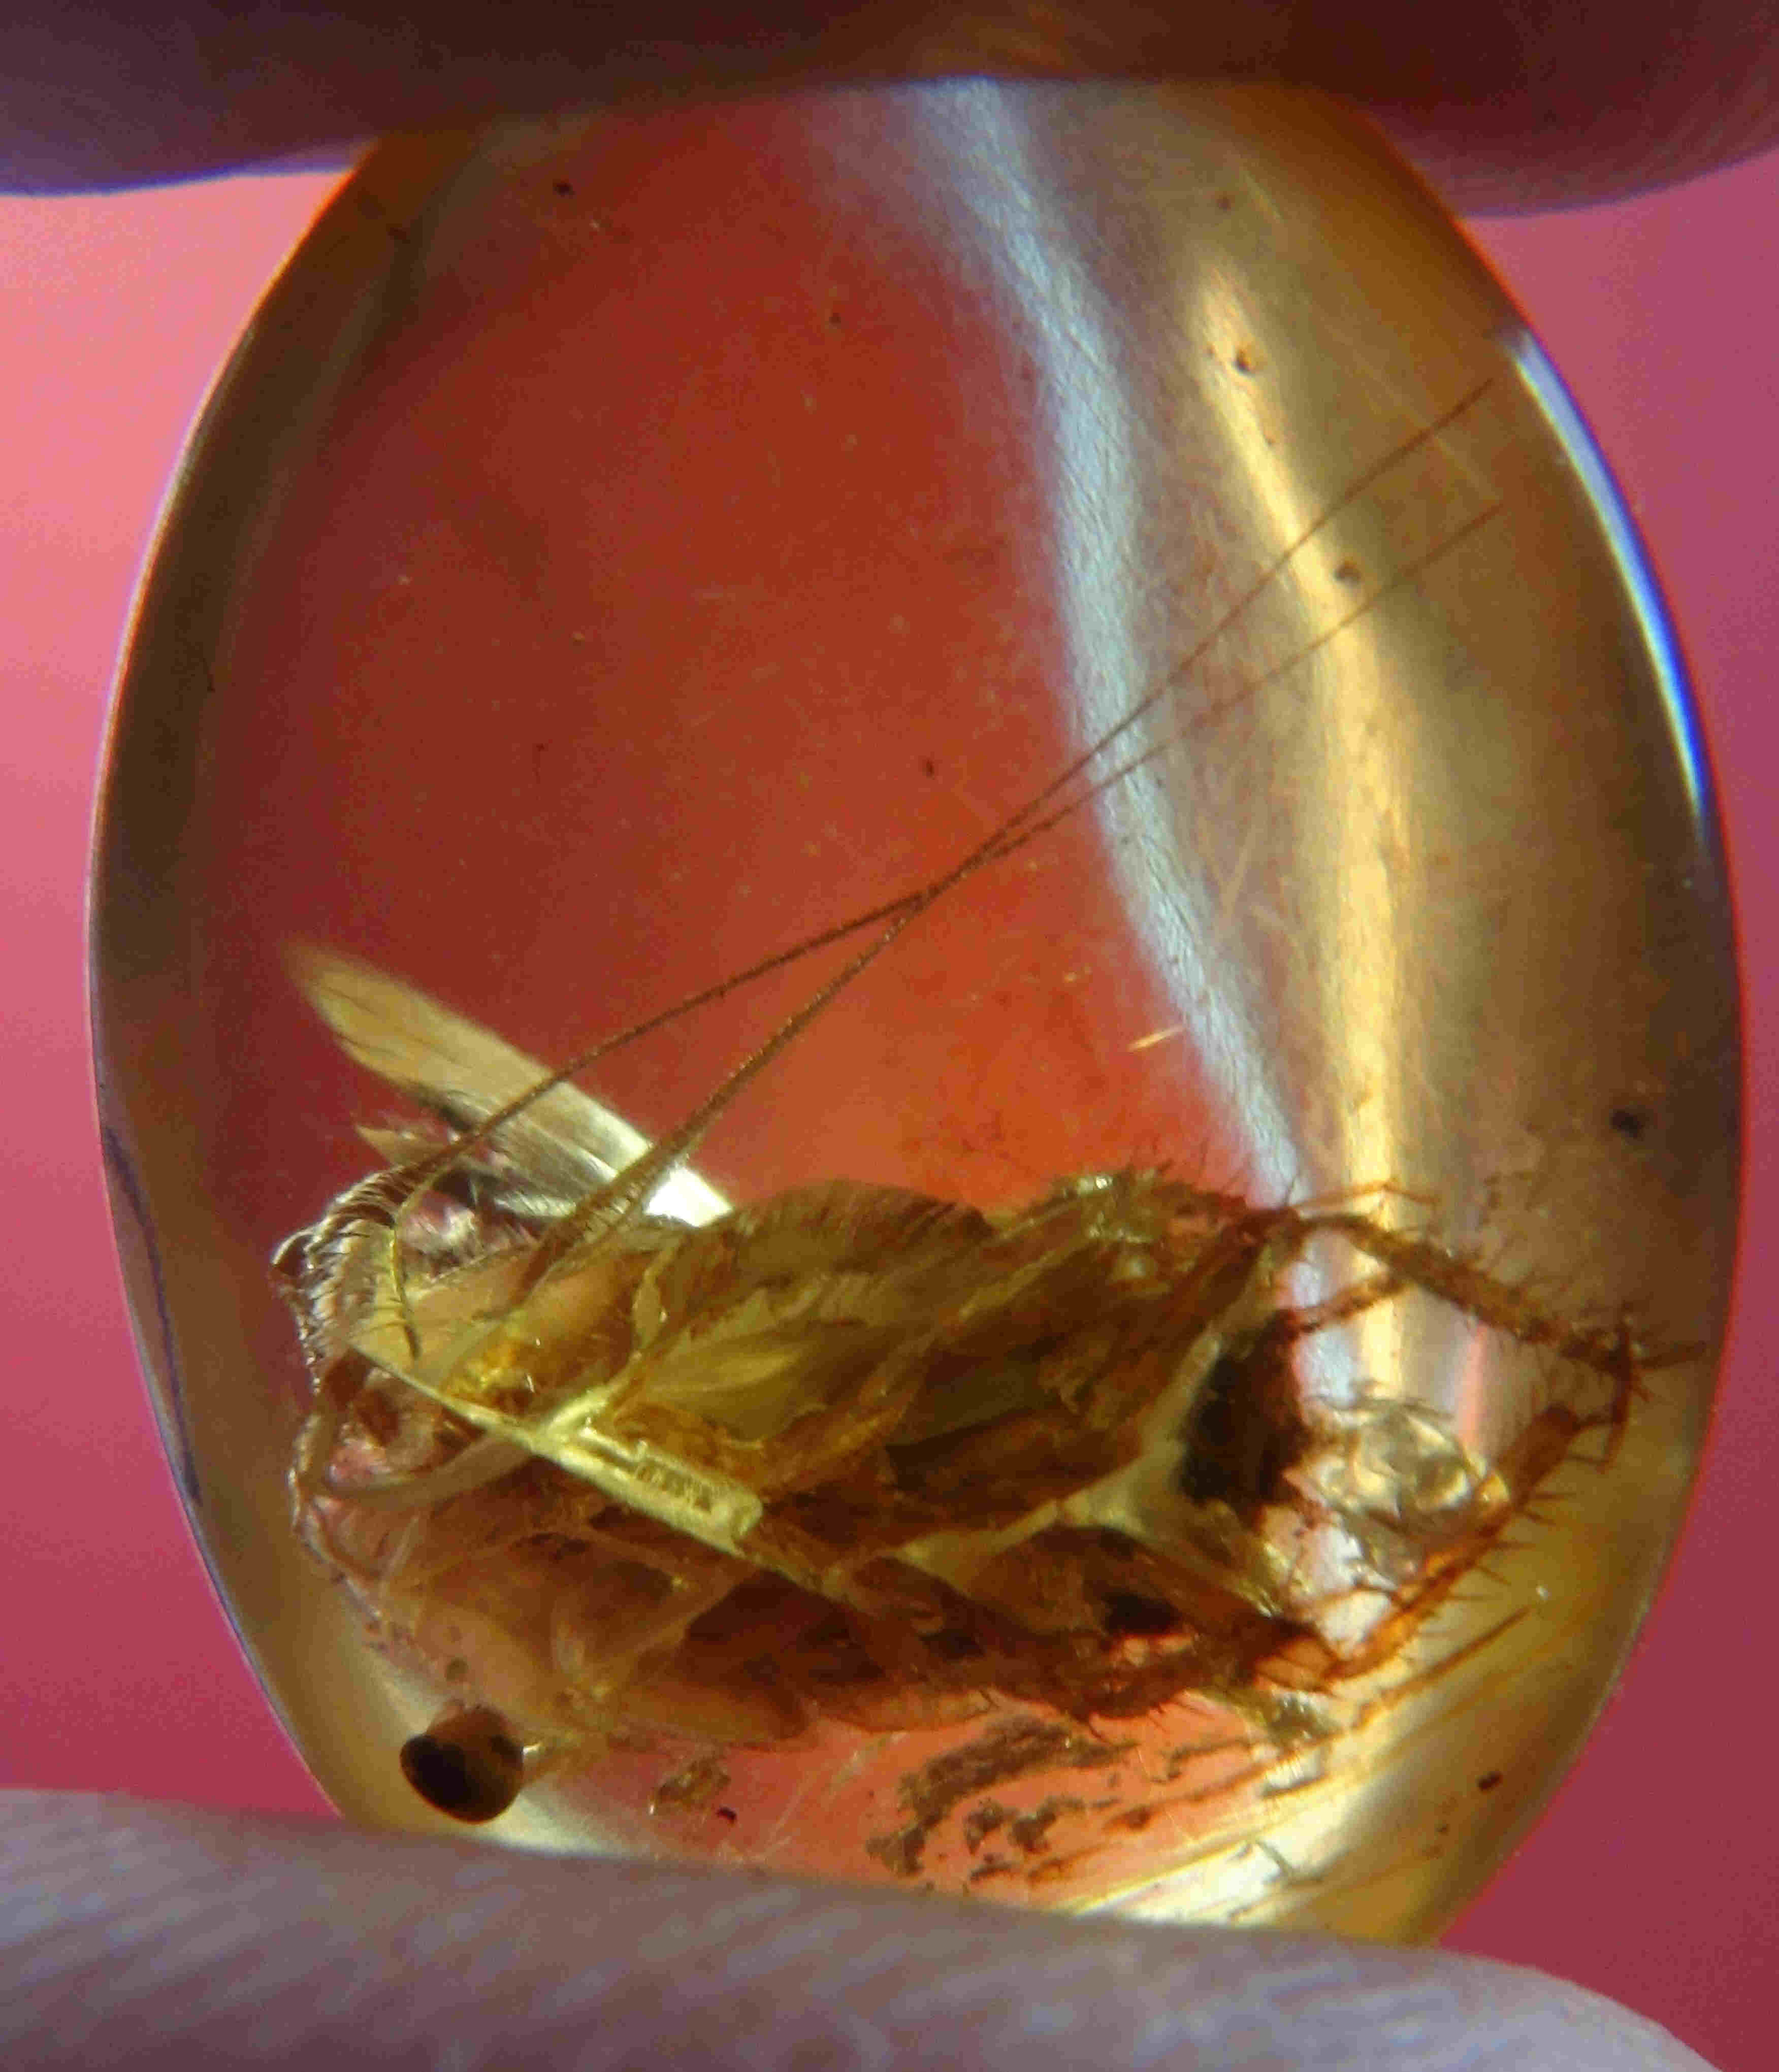 Double whiptail in amber